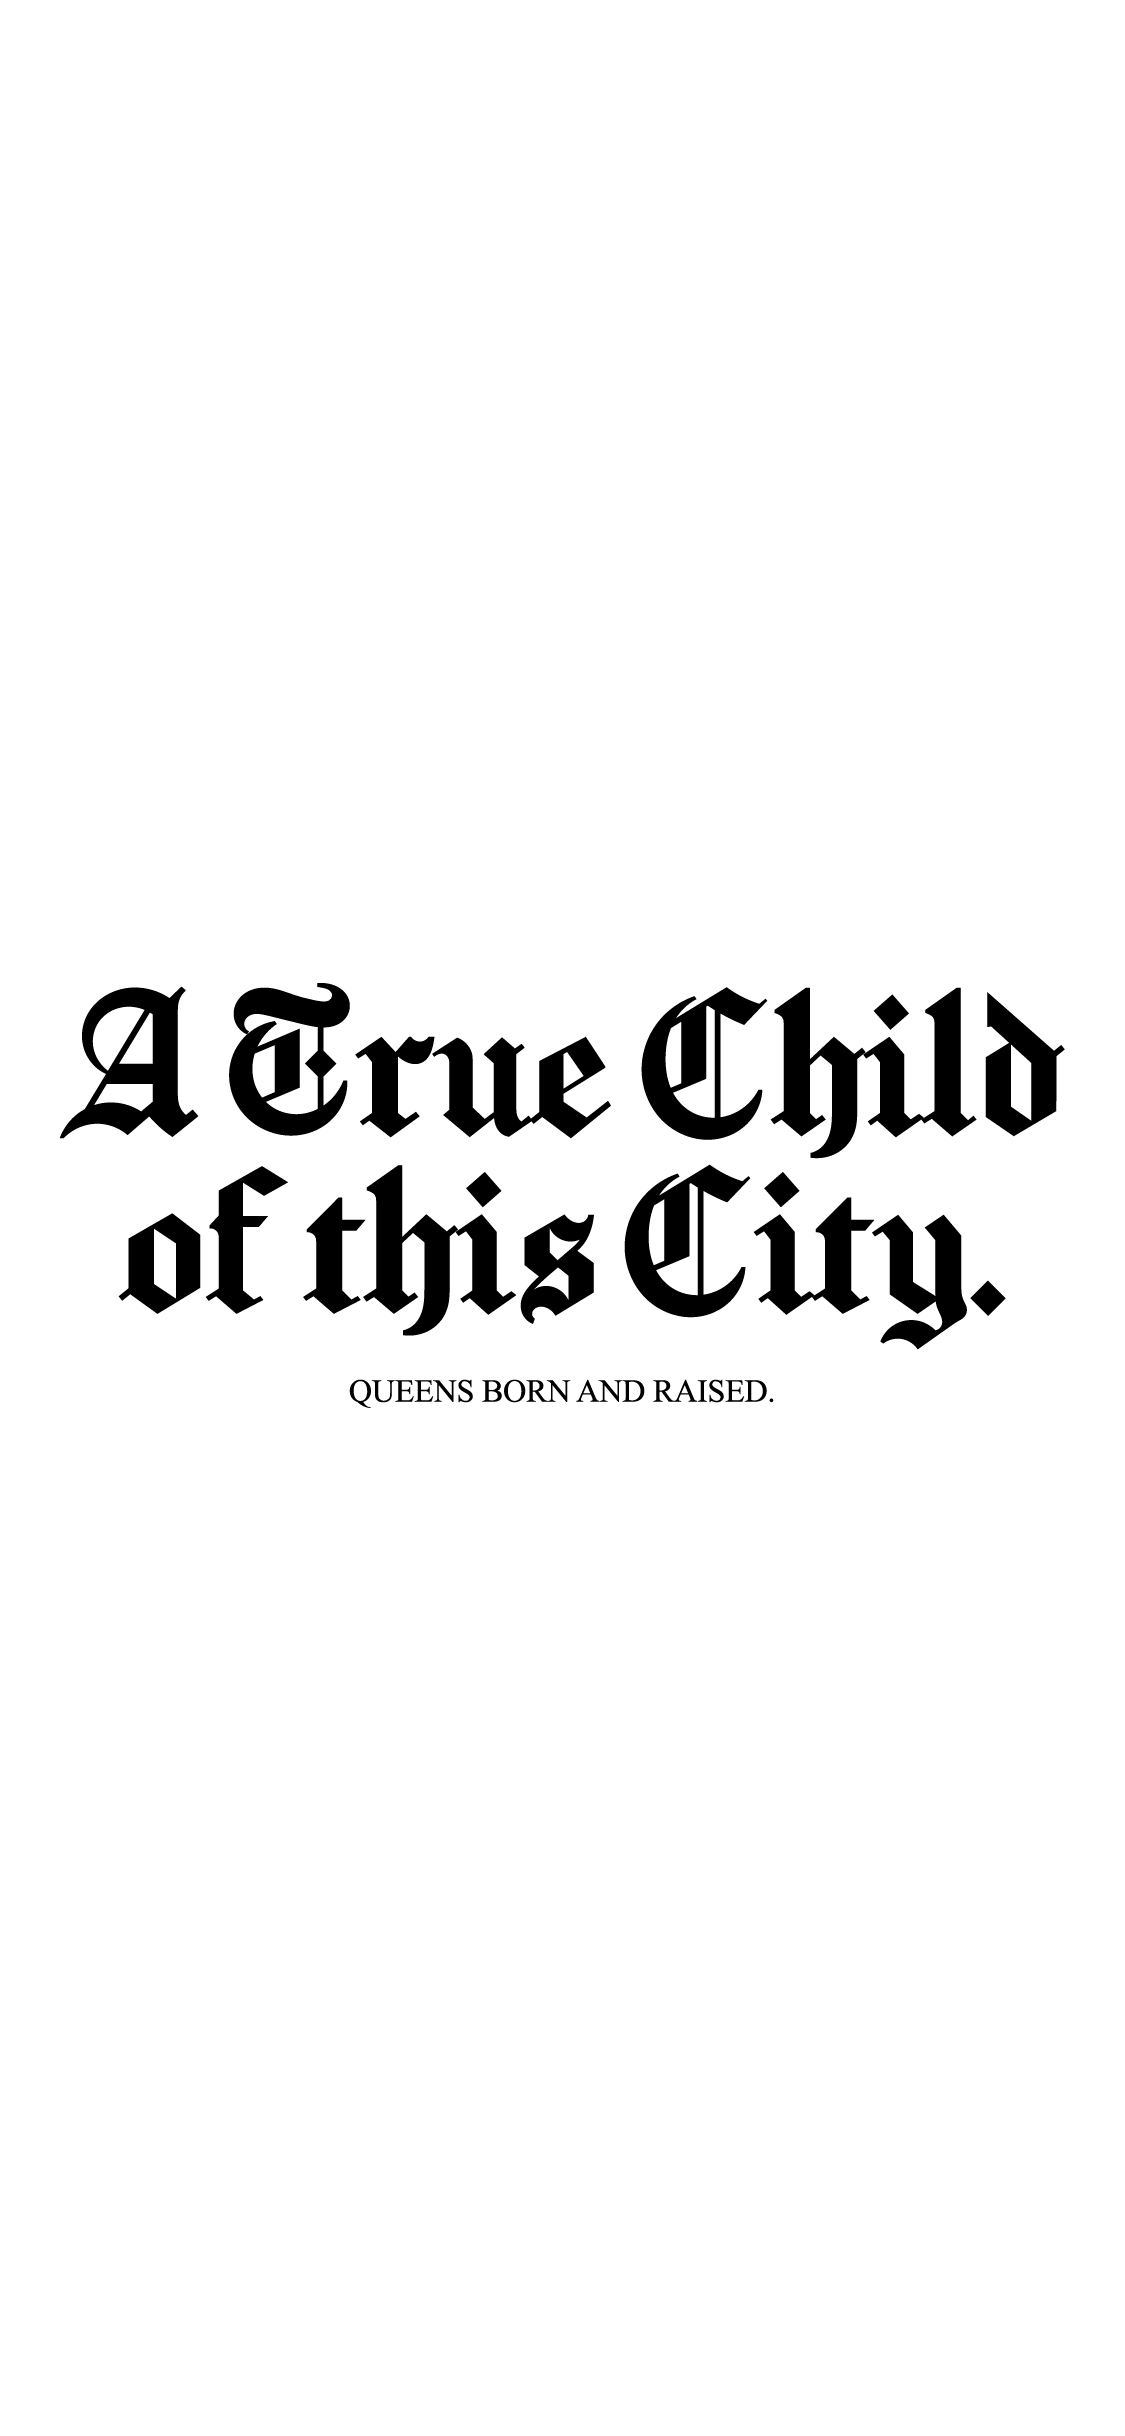 phone wallpaper displaying nyc // a true child of the city (new york times, queens)